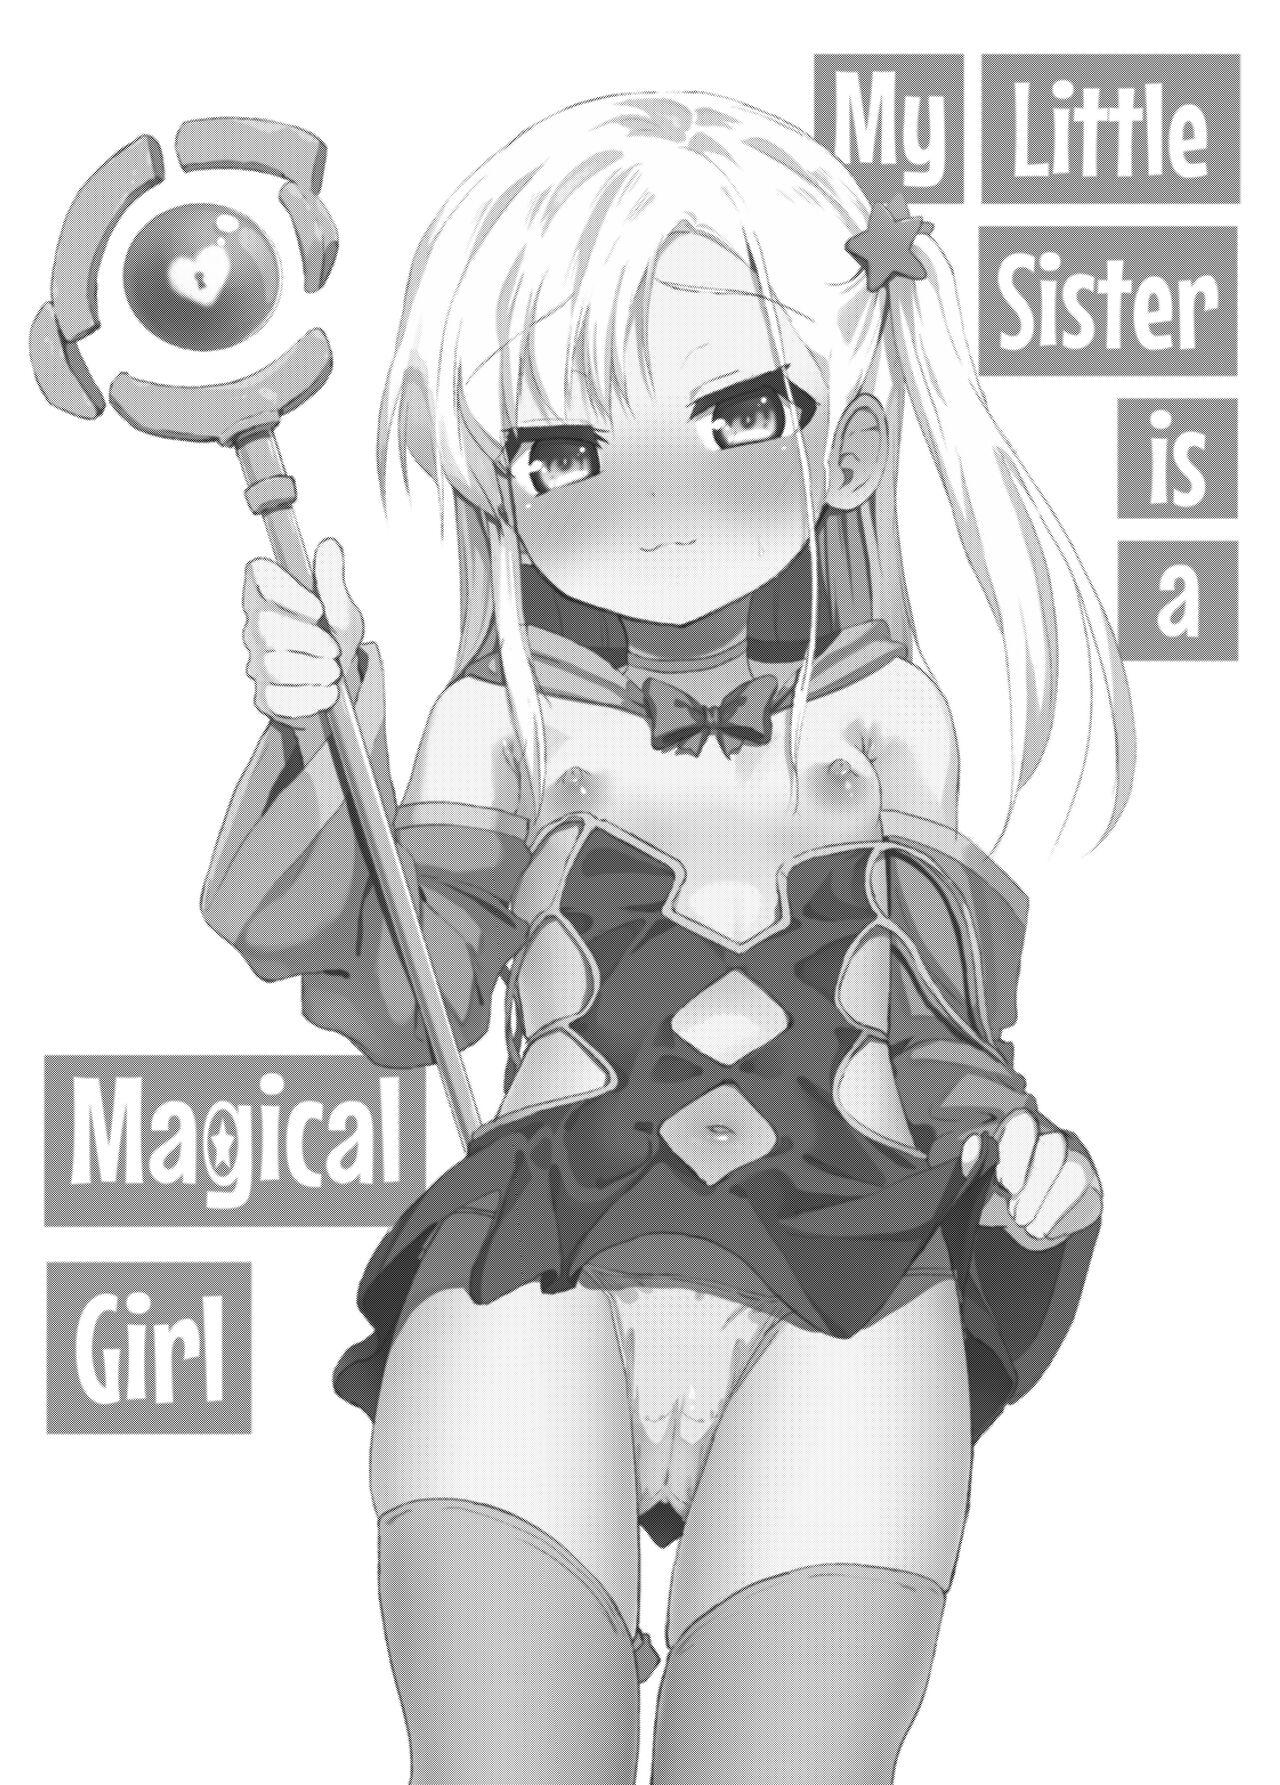 Audition Imouto wa Mahou Shoujo | My Little Sister is a Magical Girl - Original Sis - Picture 2